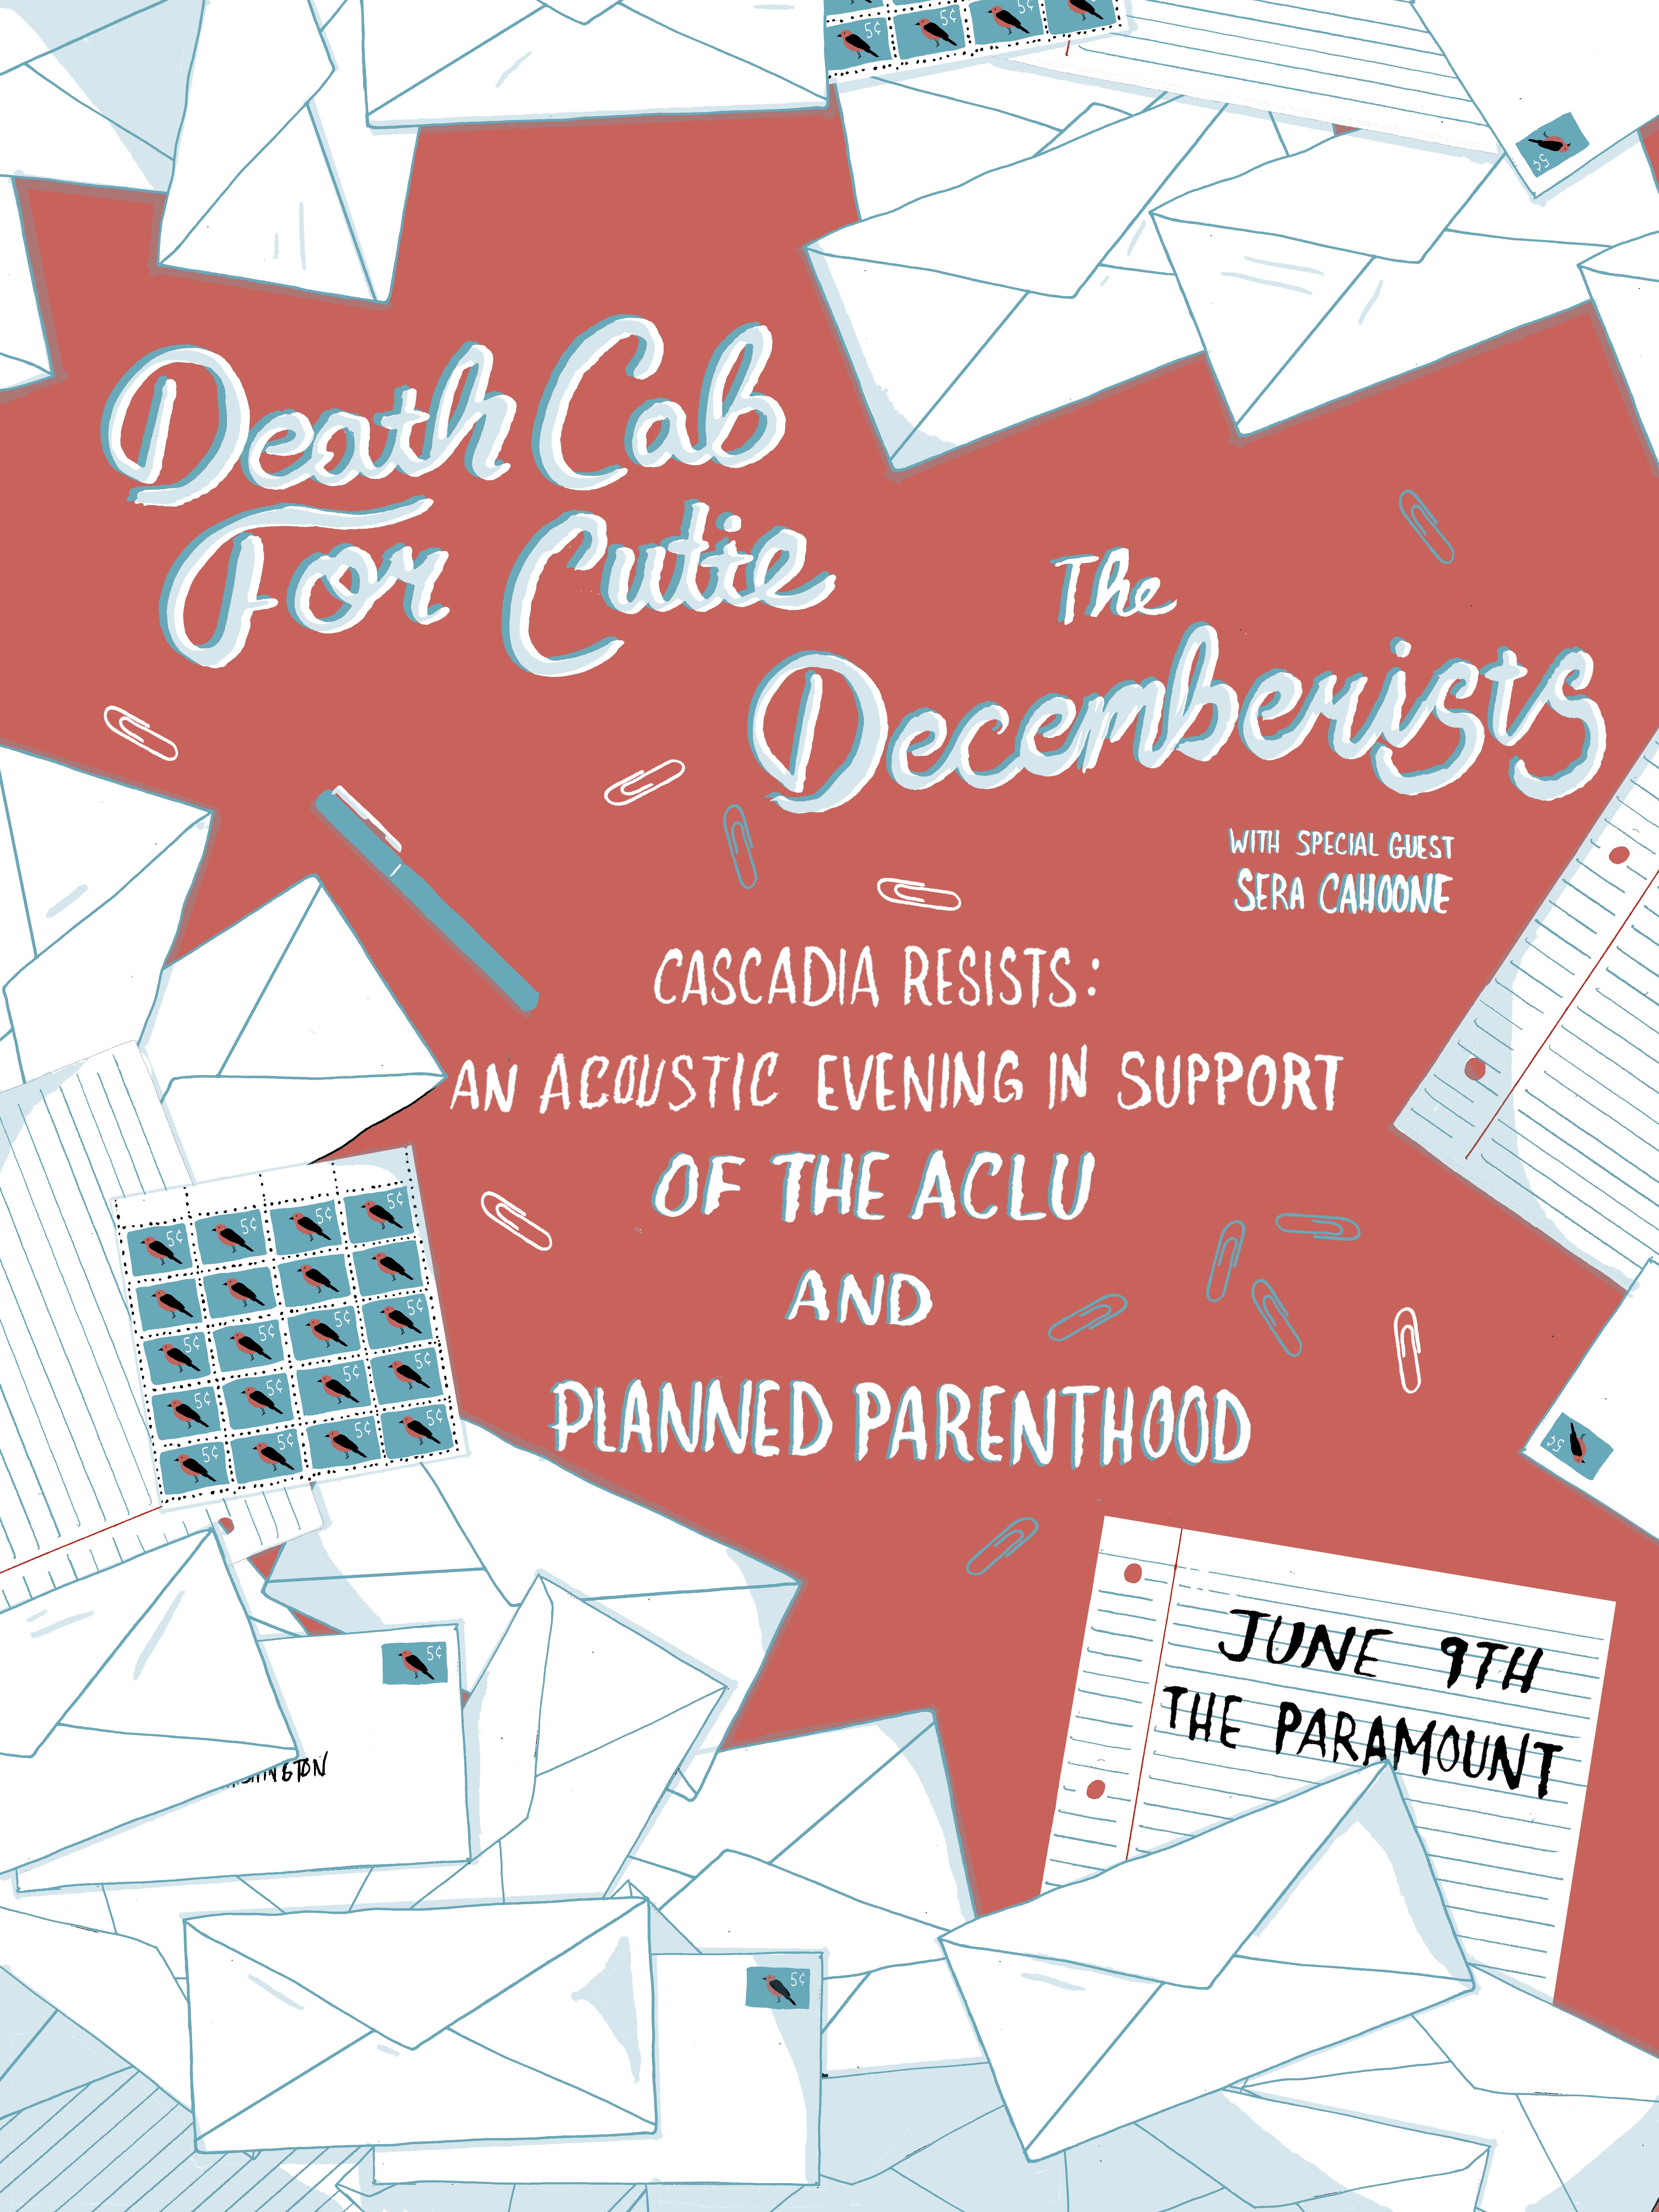 Death Cab for Cutie and The Decemberists to Hold Benefit Concert for ACLU and Planned Parenthood in Seattle